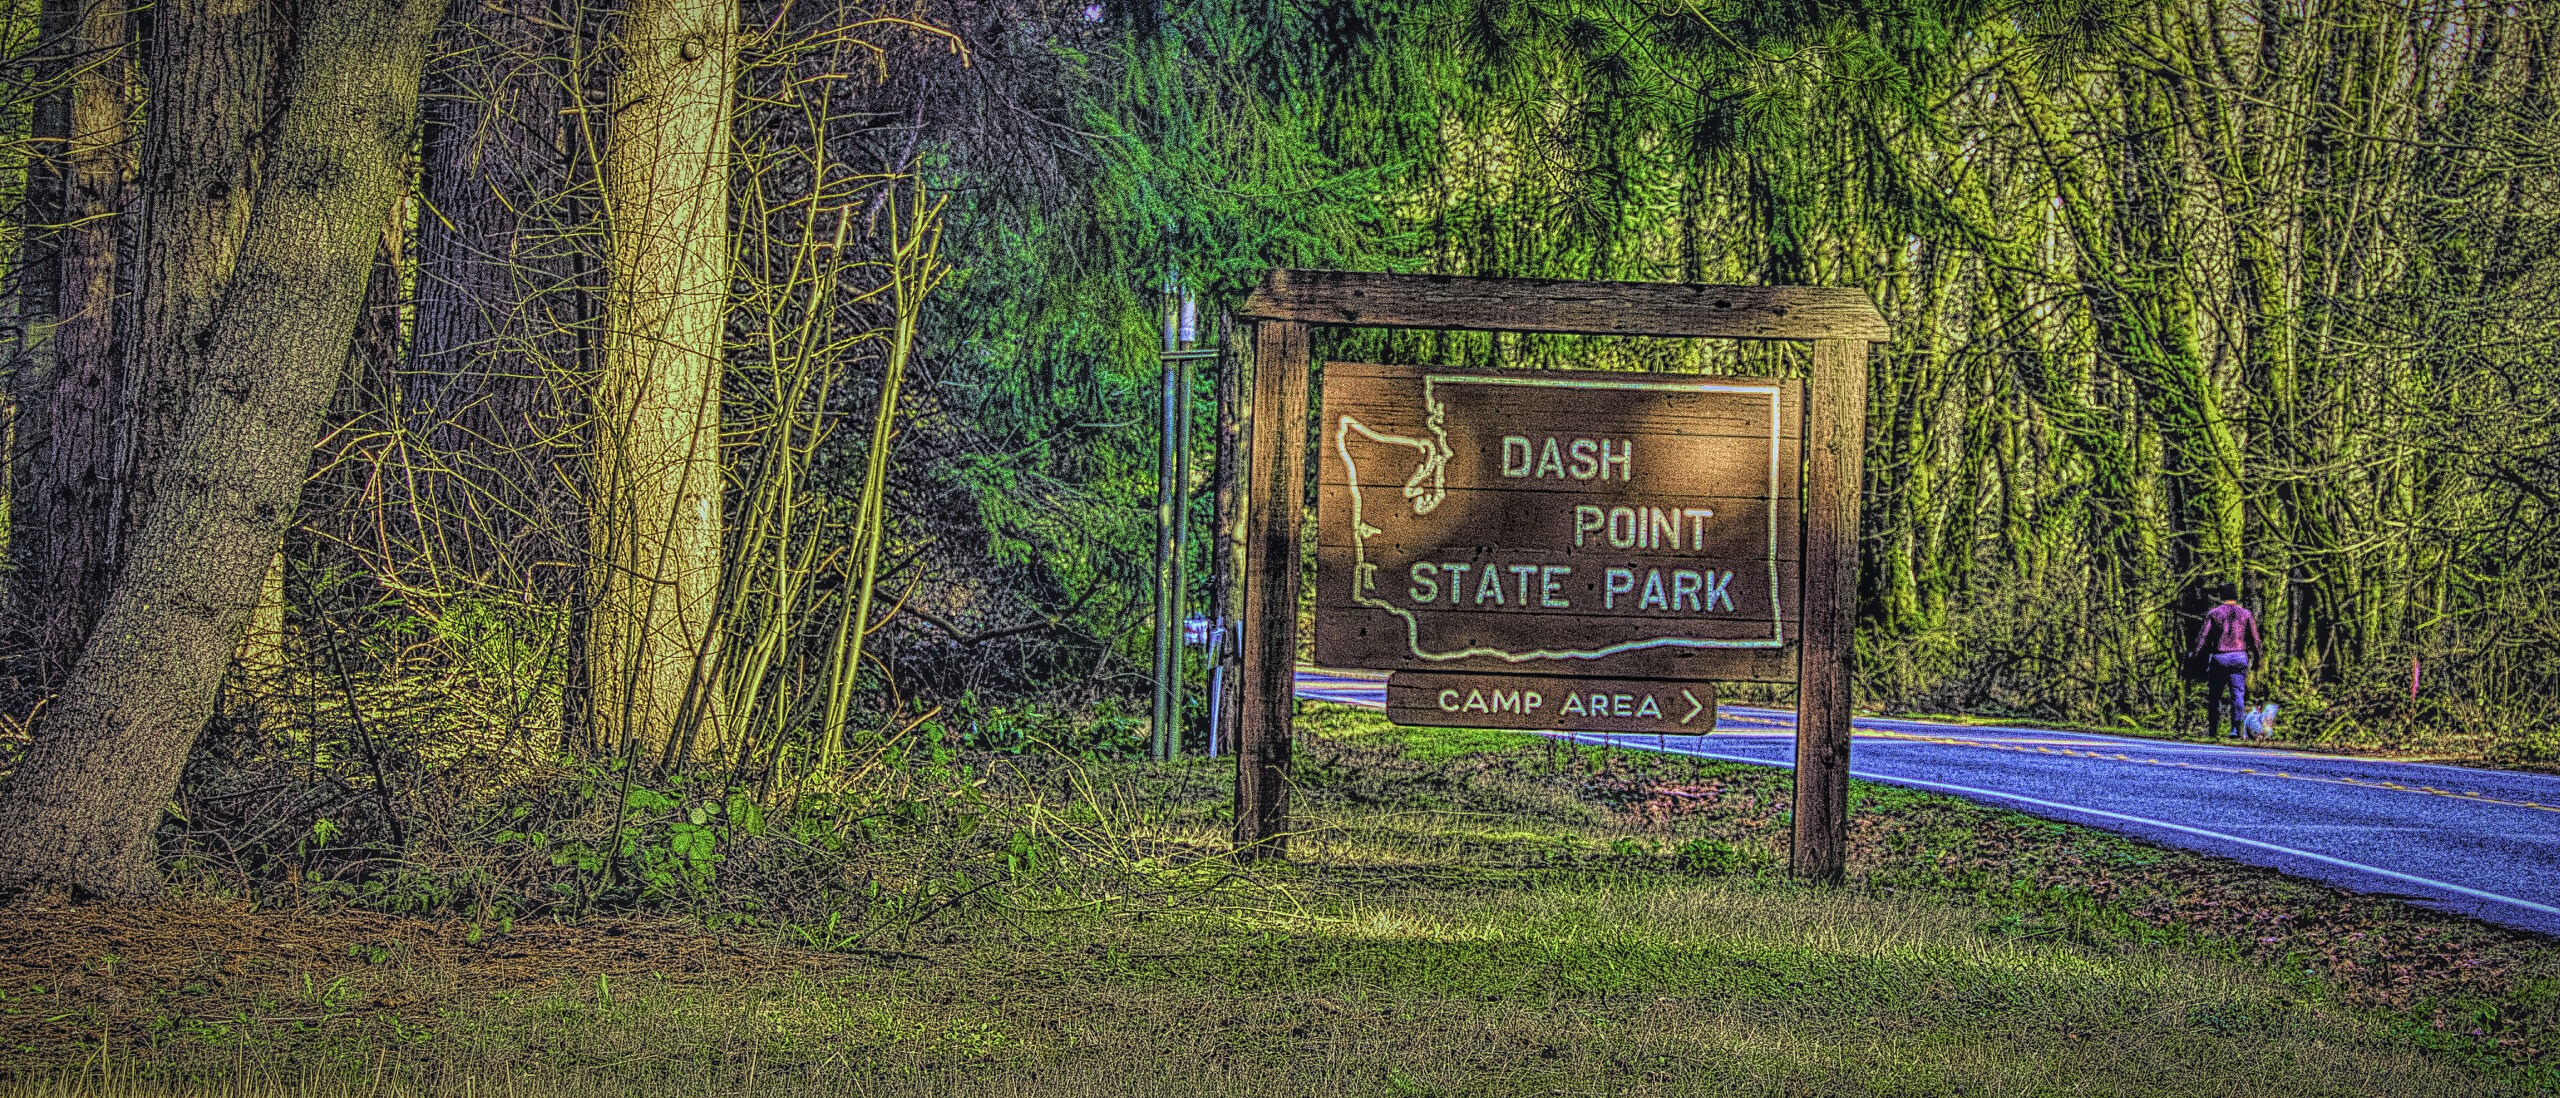 Sign for Dash Point State Park in Washington